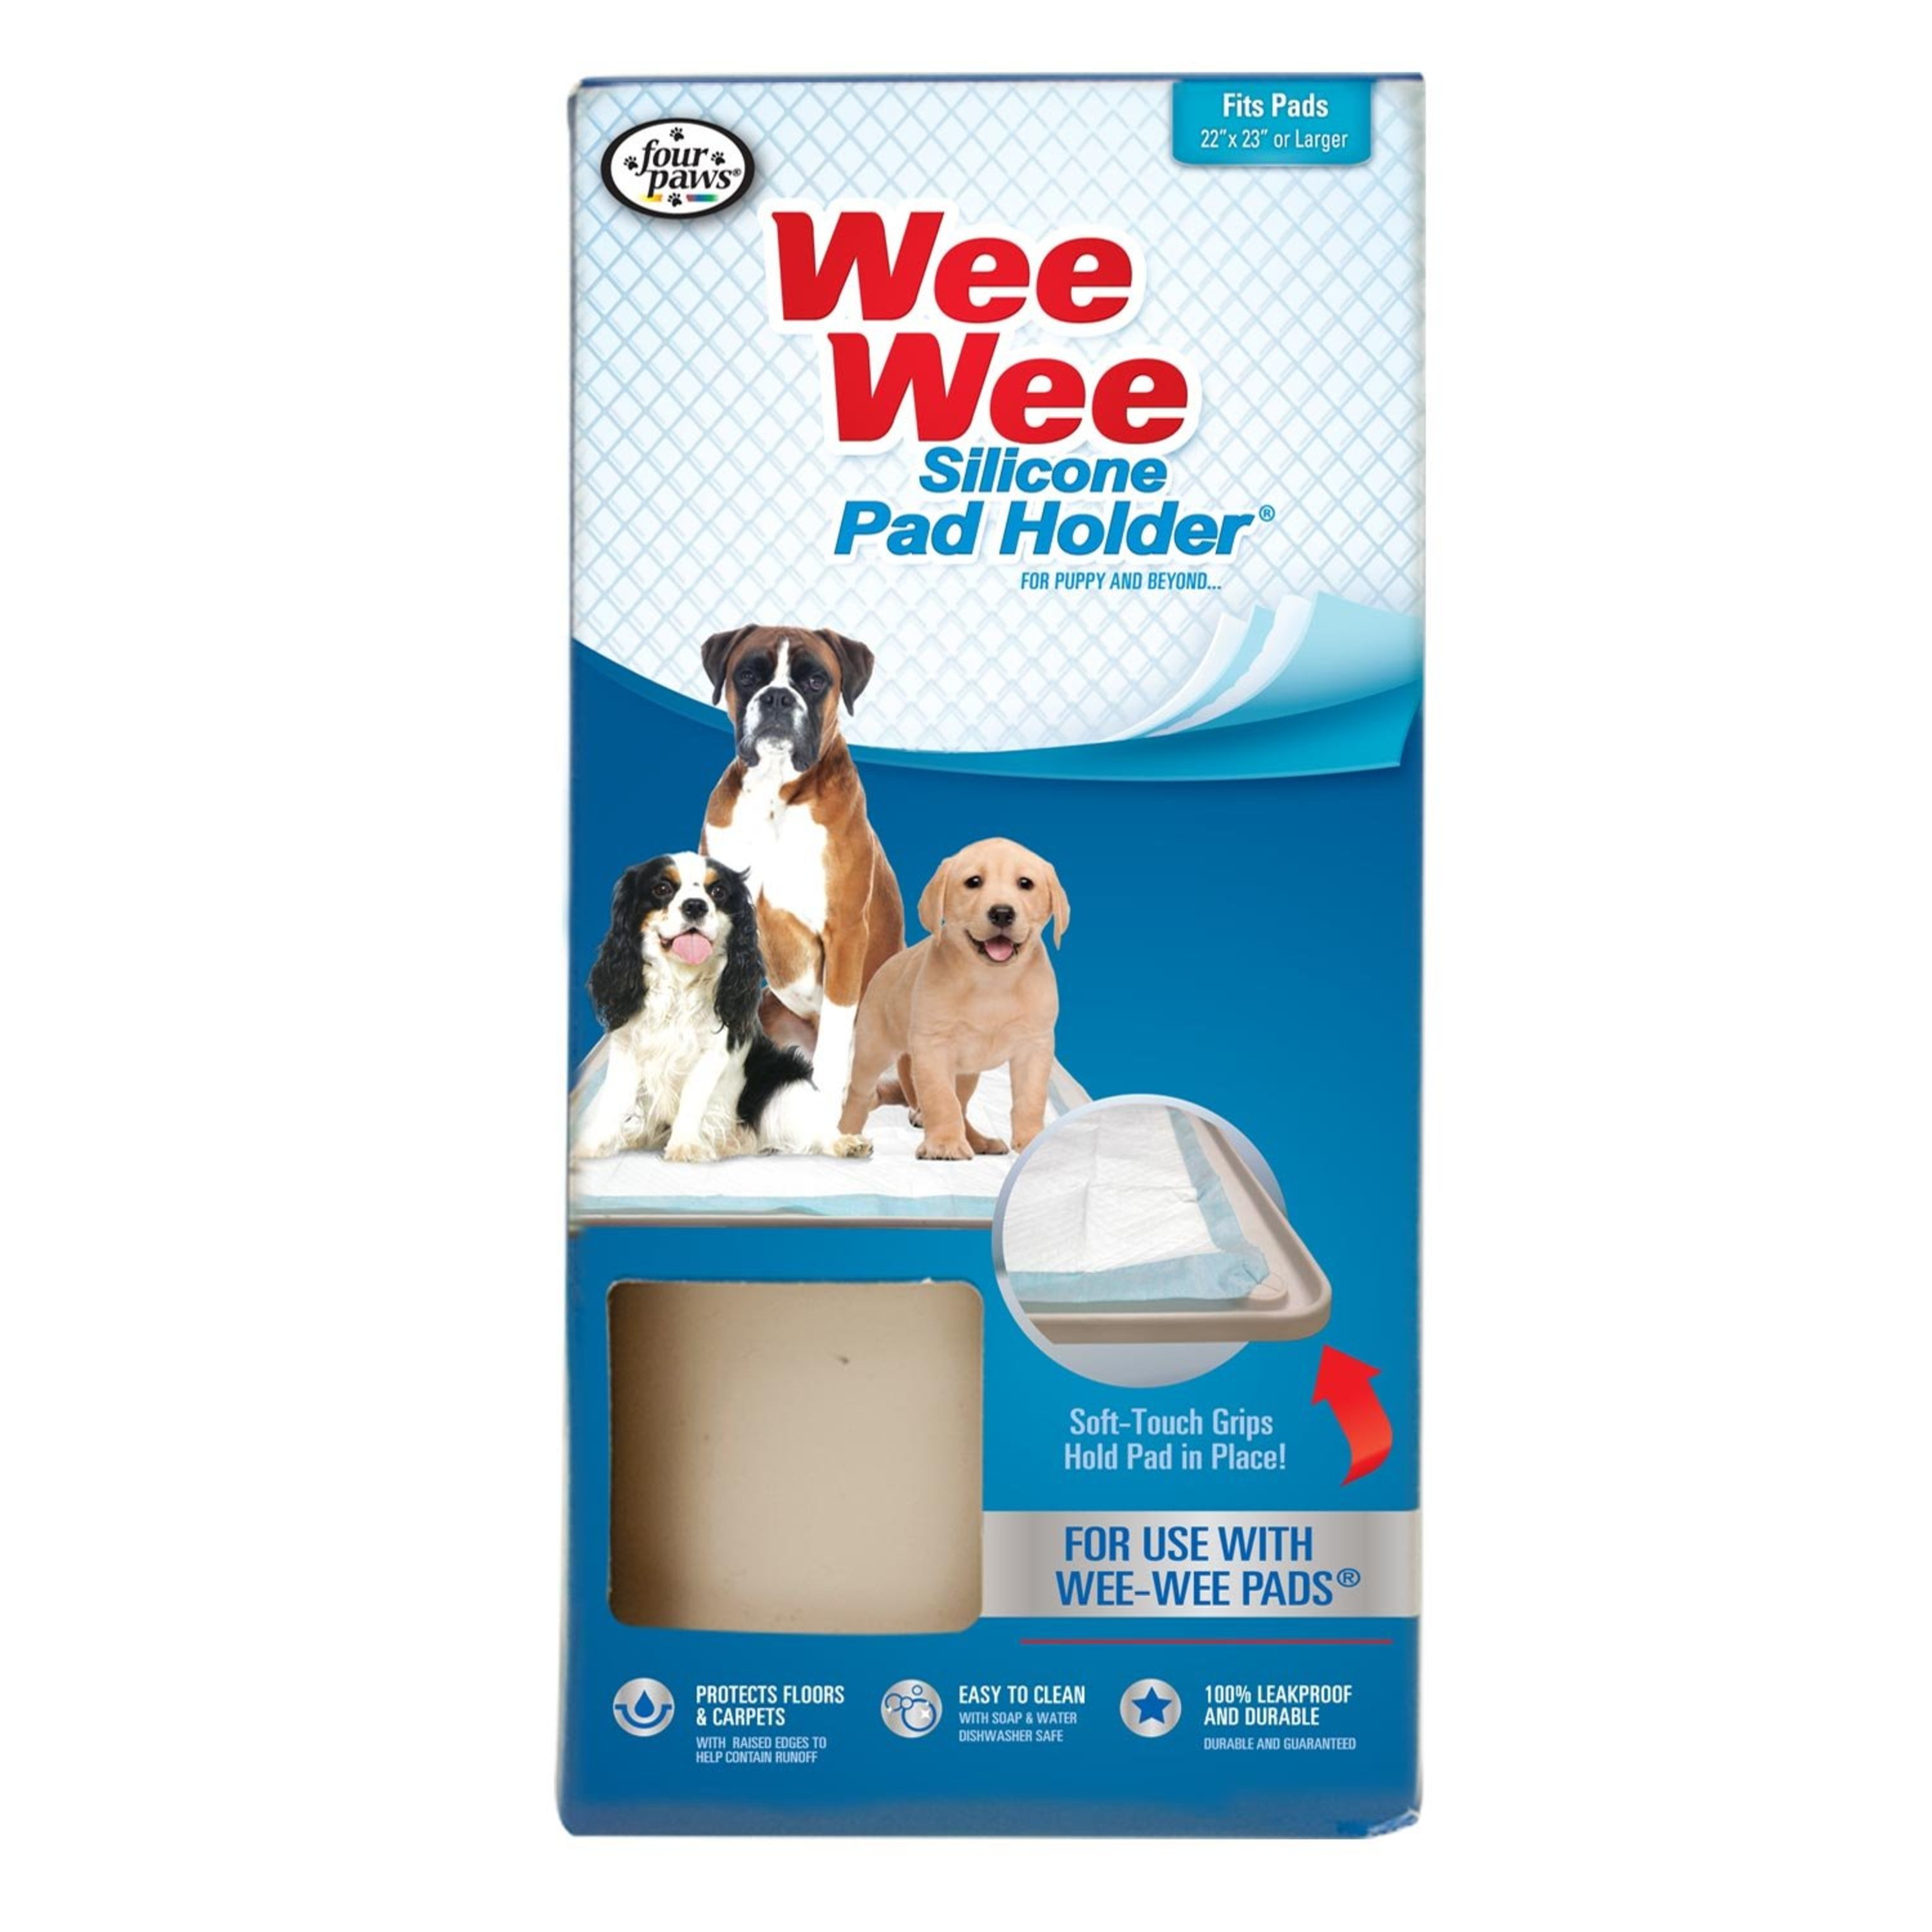 Skywin Pee Pad Holder - No Spill and Leaks Silicone Puppy Pad Holder, Secure30 x 23 Inches Pee Pad, Beige